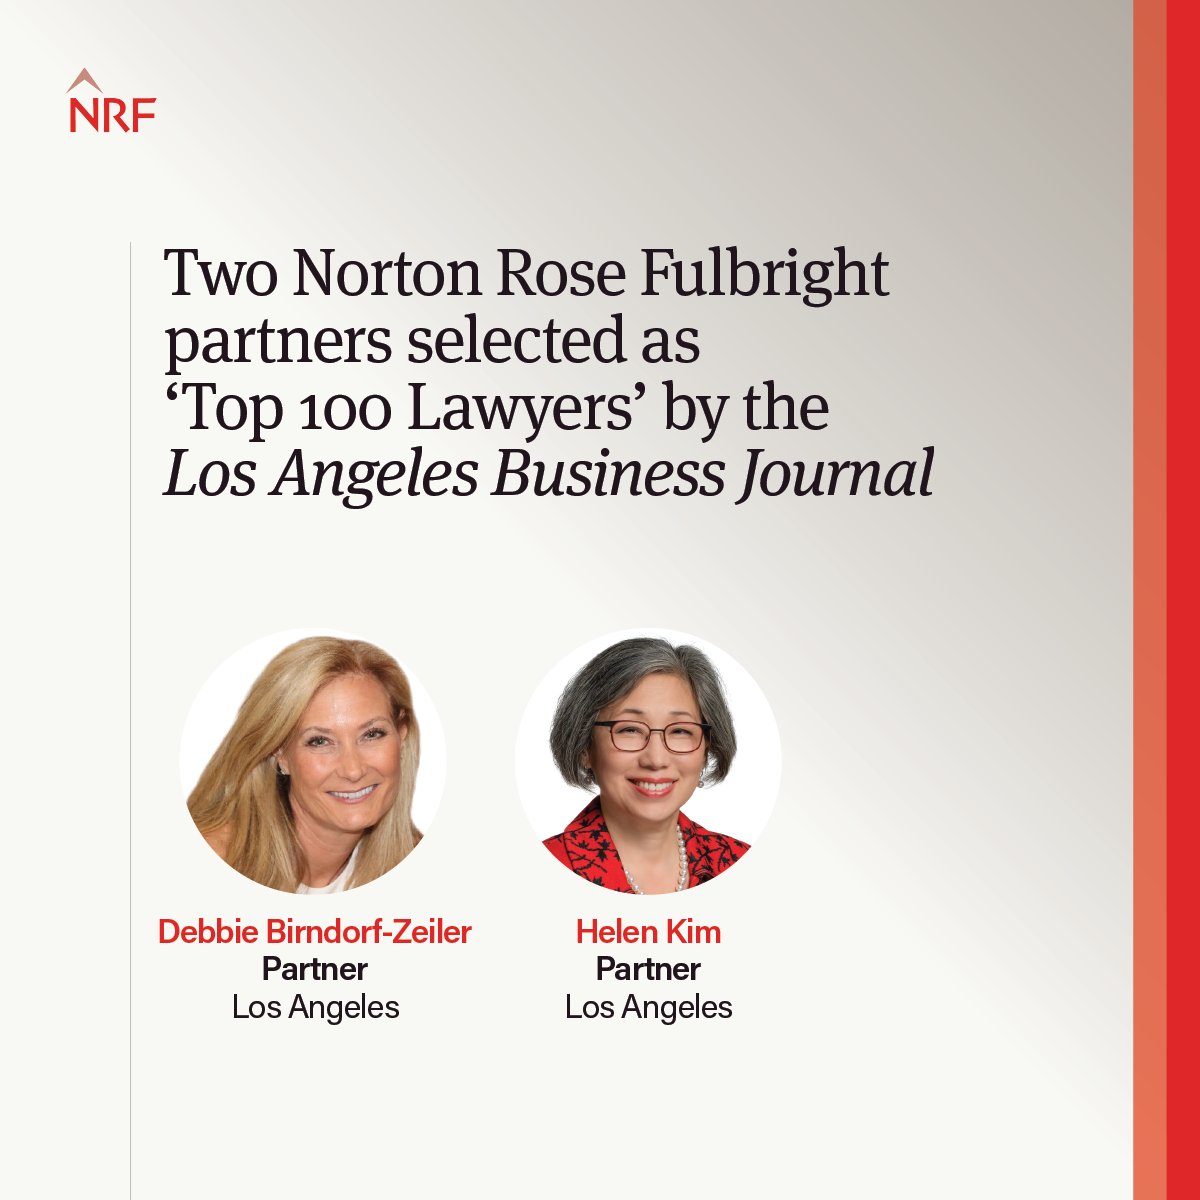 We’re excited to announce that Los Angeles partners Debbie Birndorf-Zeiler and Helen Kim have been named to Los Angeles Business Journal's annual Top 100 Lawyers list. ow.ly/MczT50RjRNp